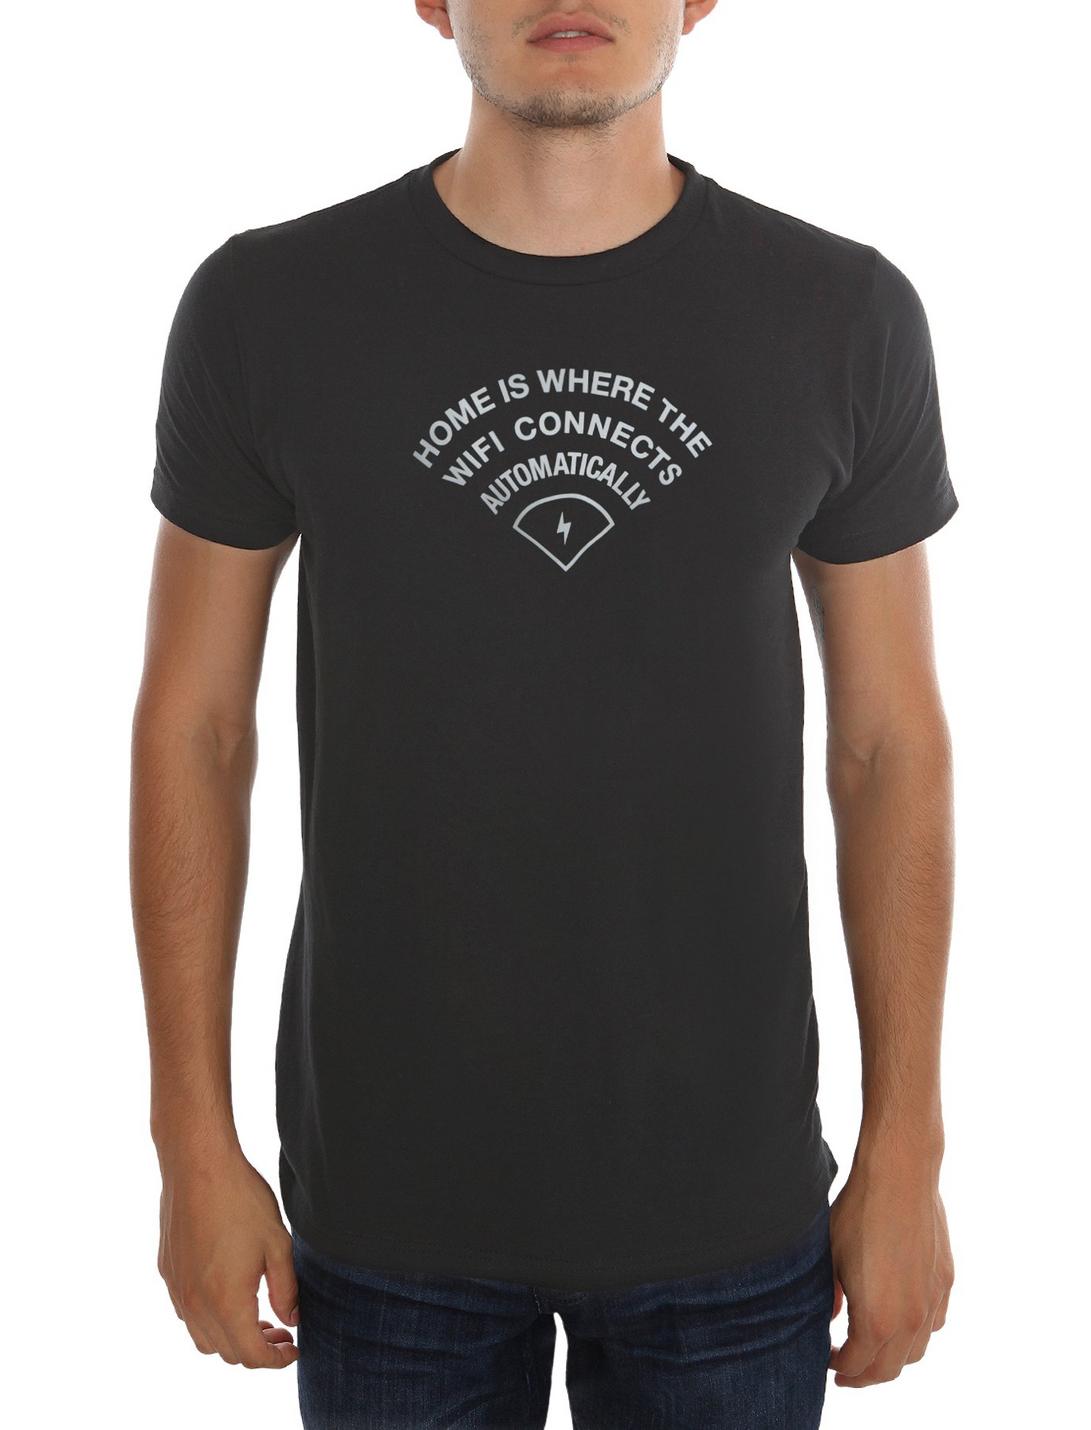 Home Is Where WiFi Connects T-Shirt, BLACK, hi-res